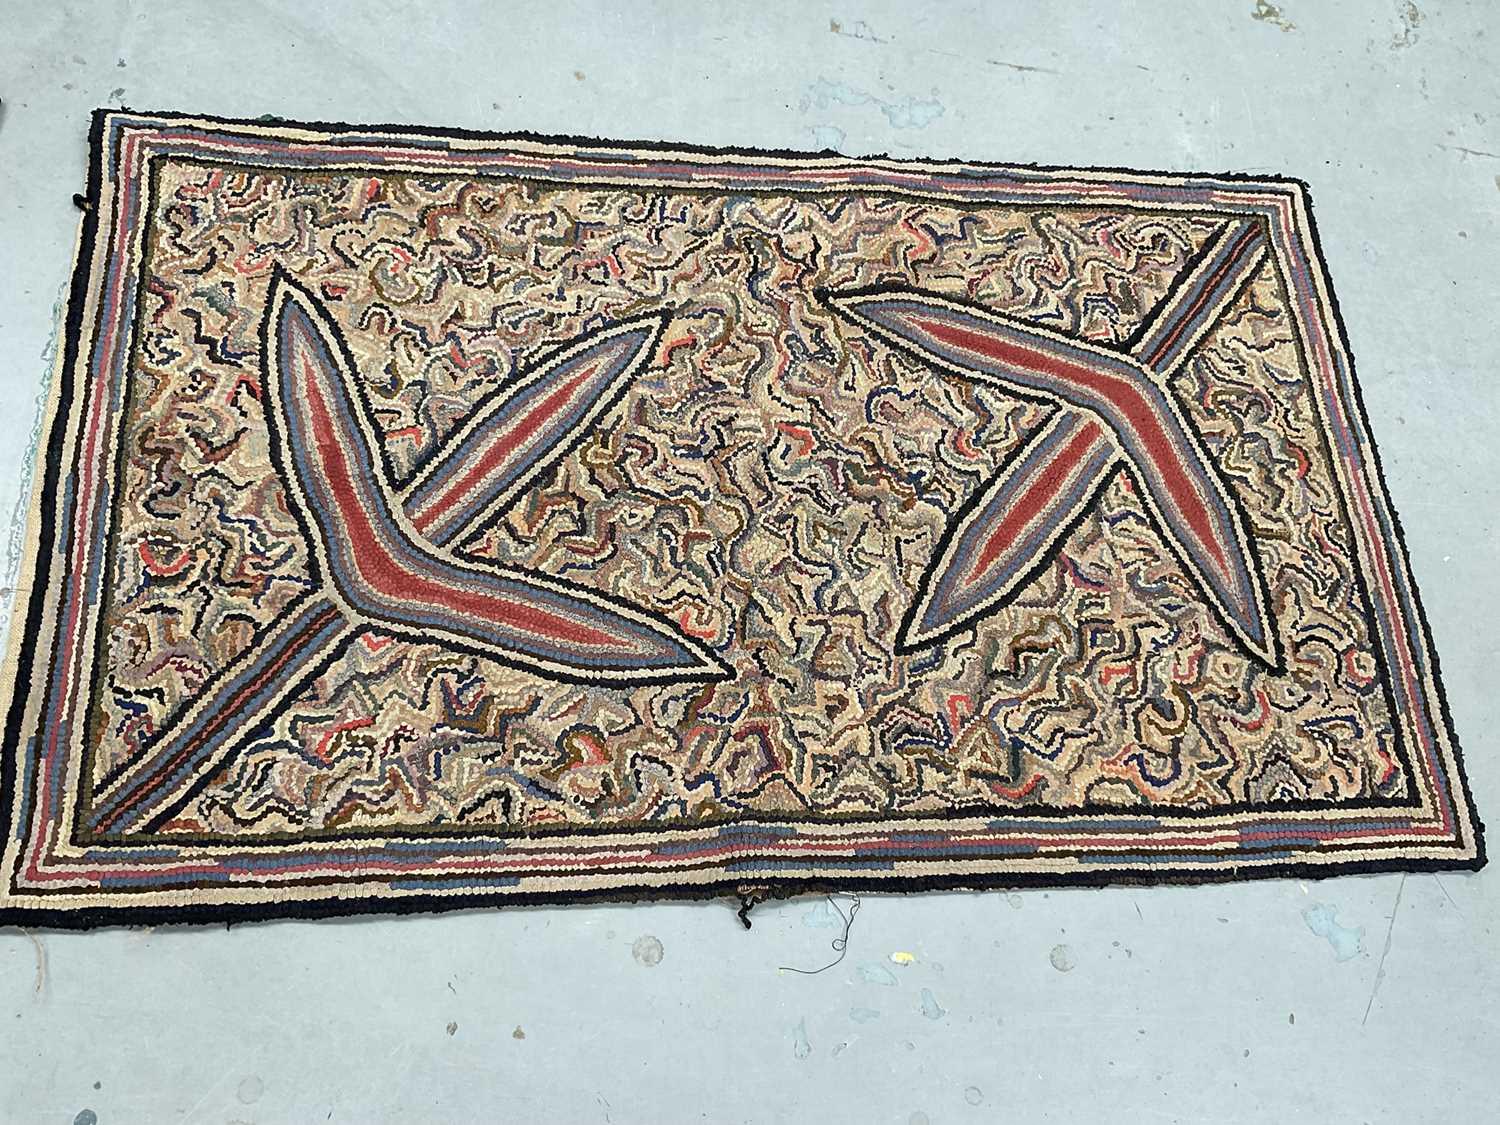 Omega style pair of hand woven rugs with abstract design, 132 x 82cm - Image 3 of 6